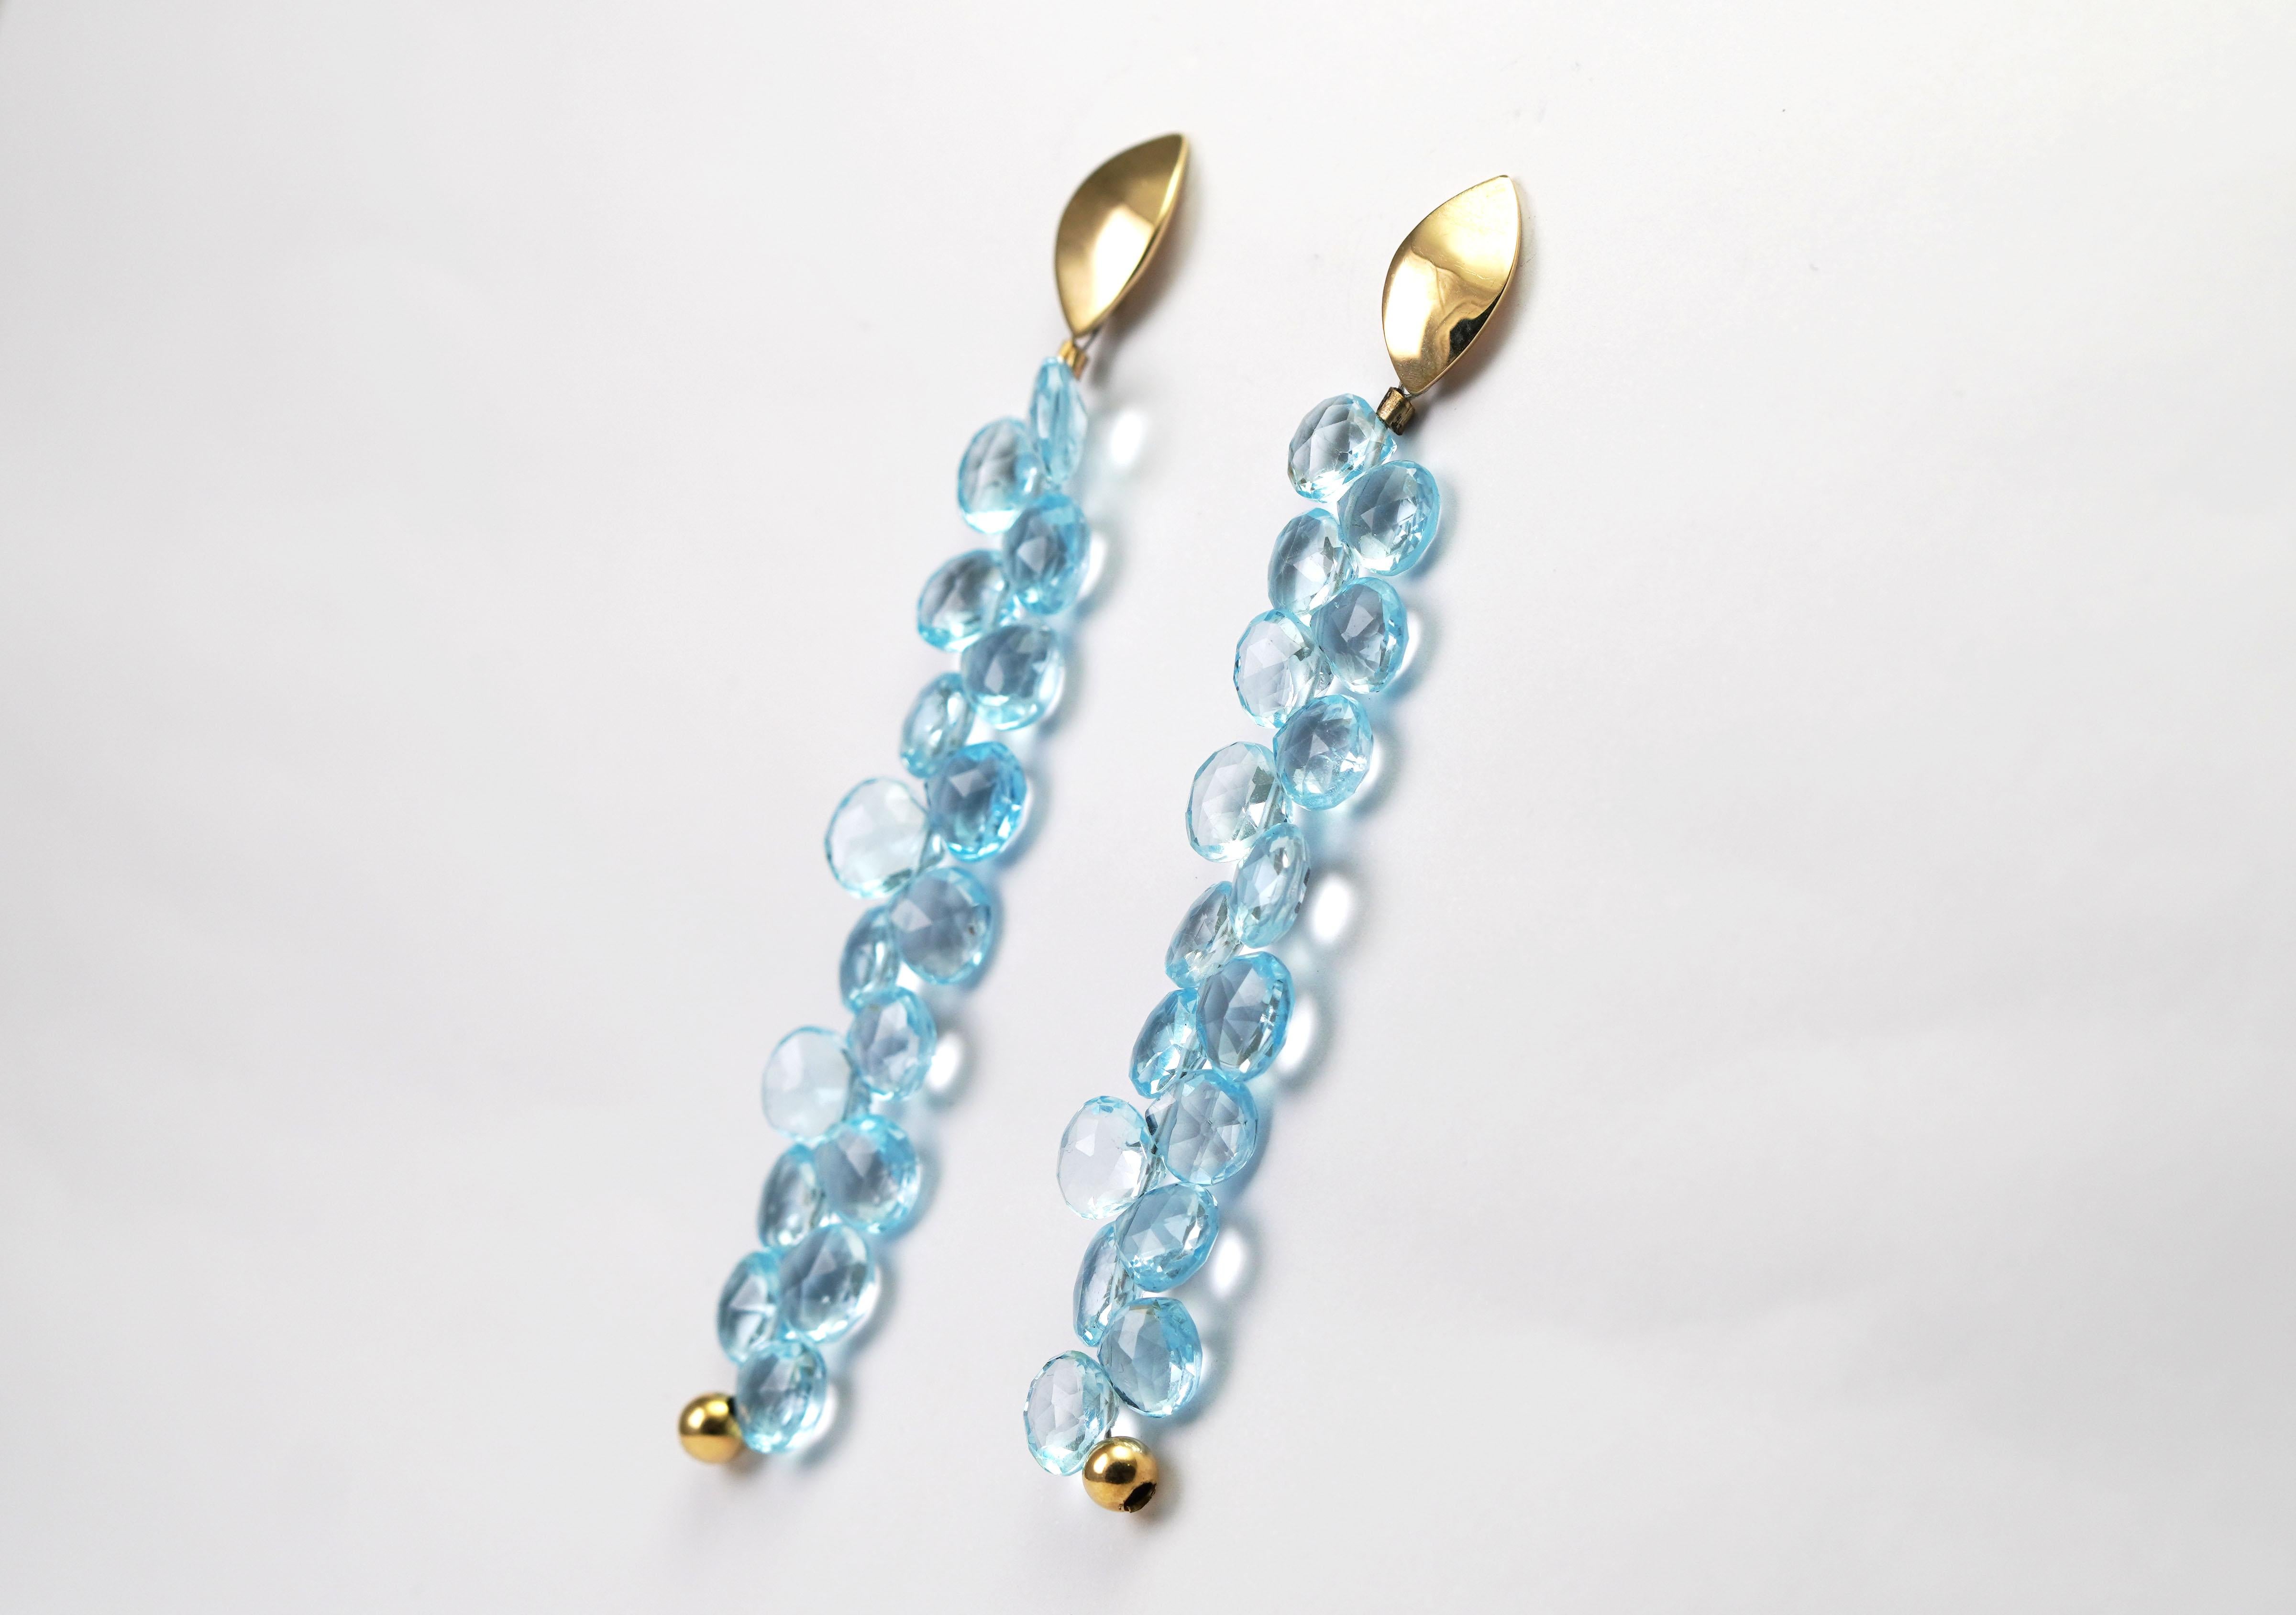 14 kt gold pair of earrings with Blue Topaz
Gold color: Yellow
Dimensions: 75 mm width
Total weight: 9.96 grams

Set with:
- Topaz x 34
Cut: Rose
Colour: Blue